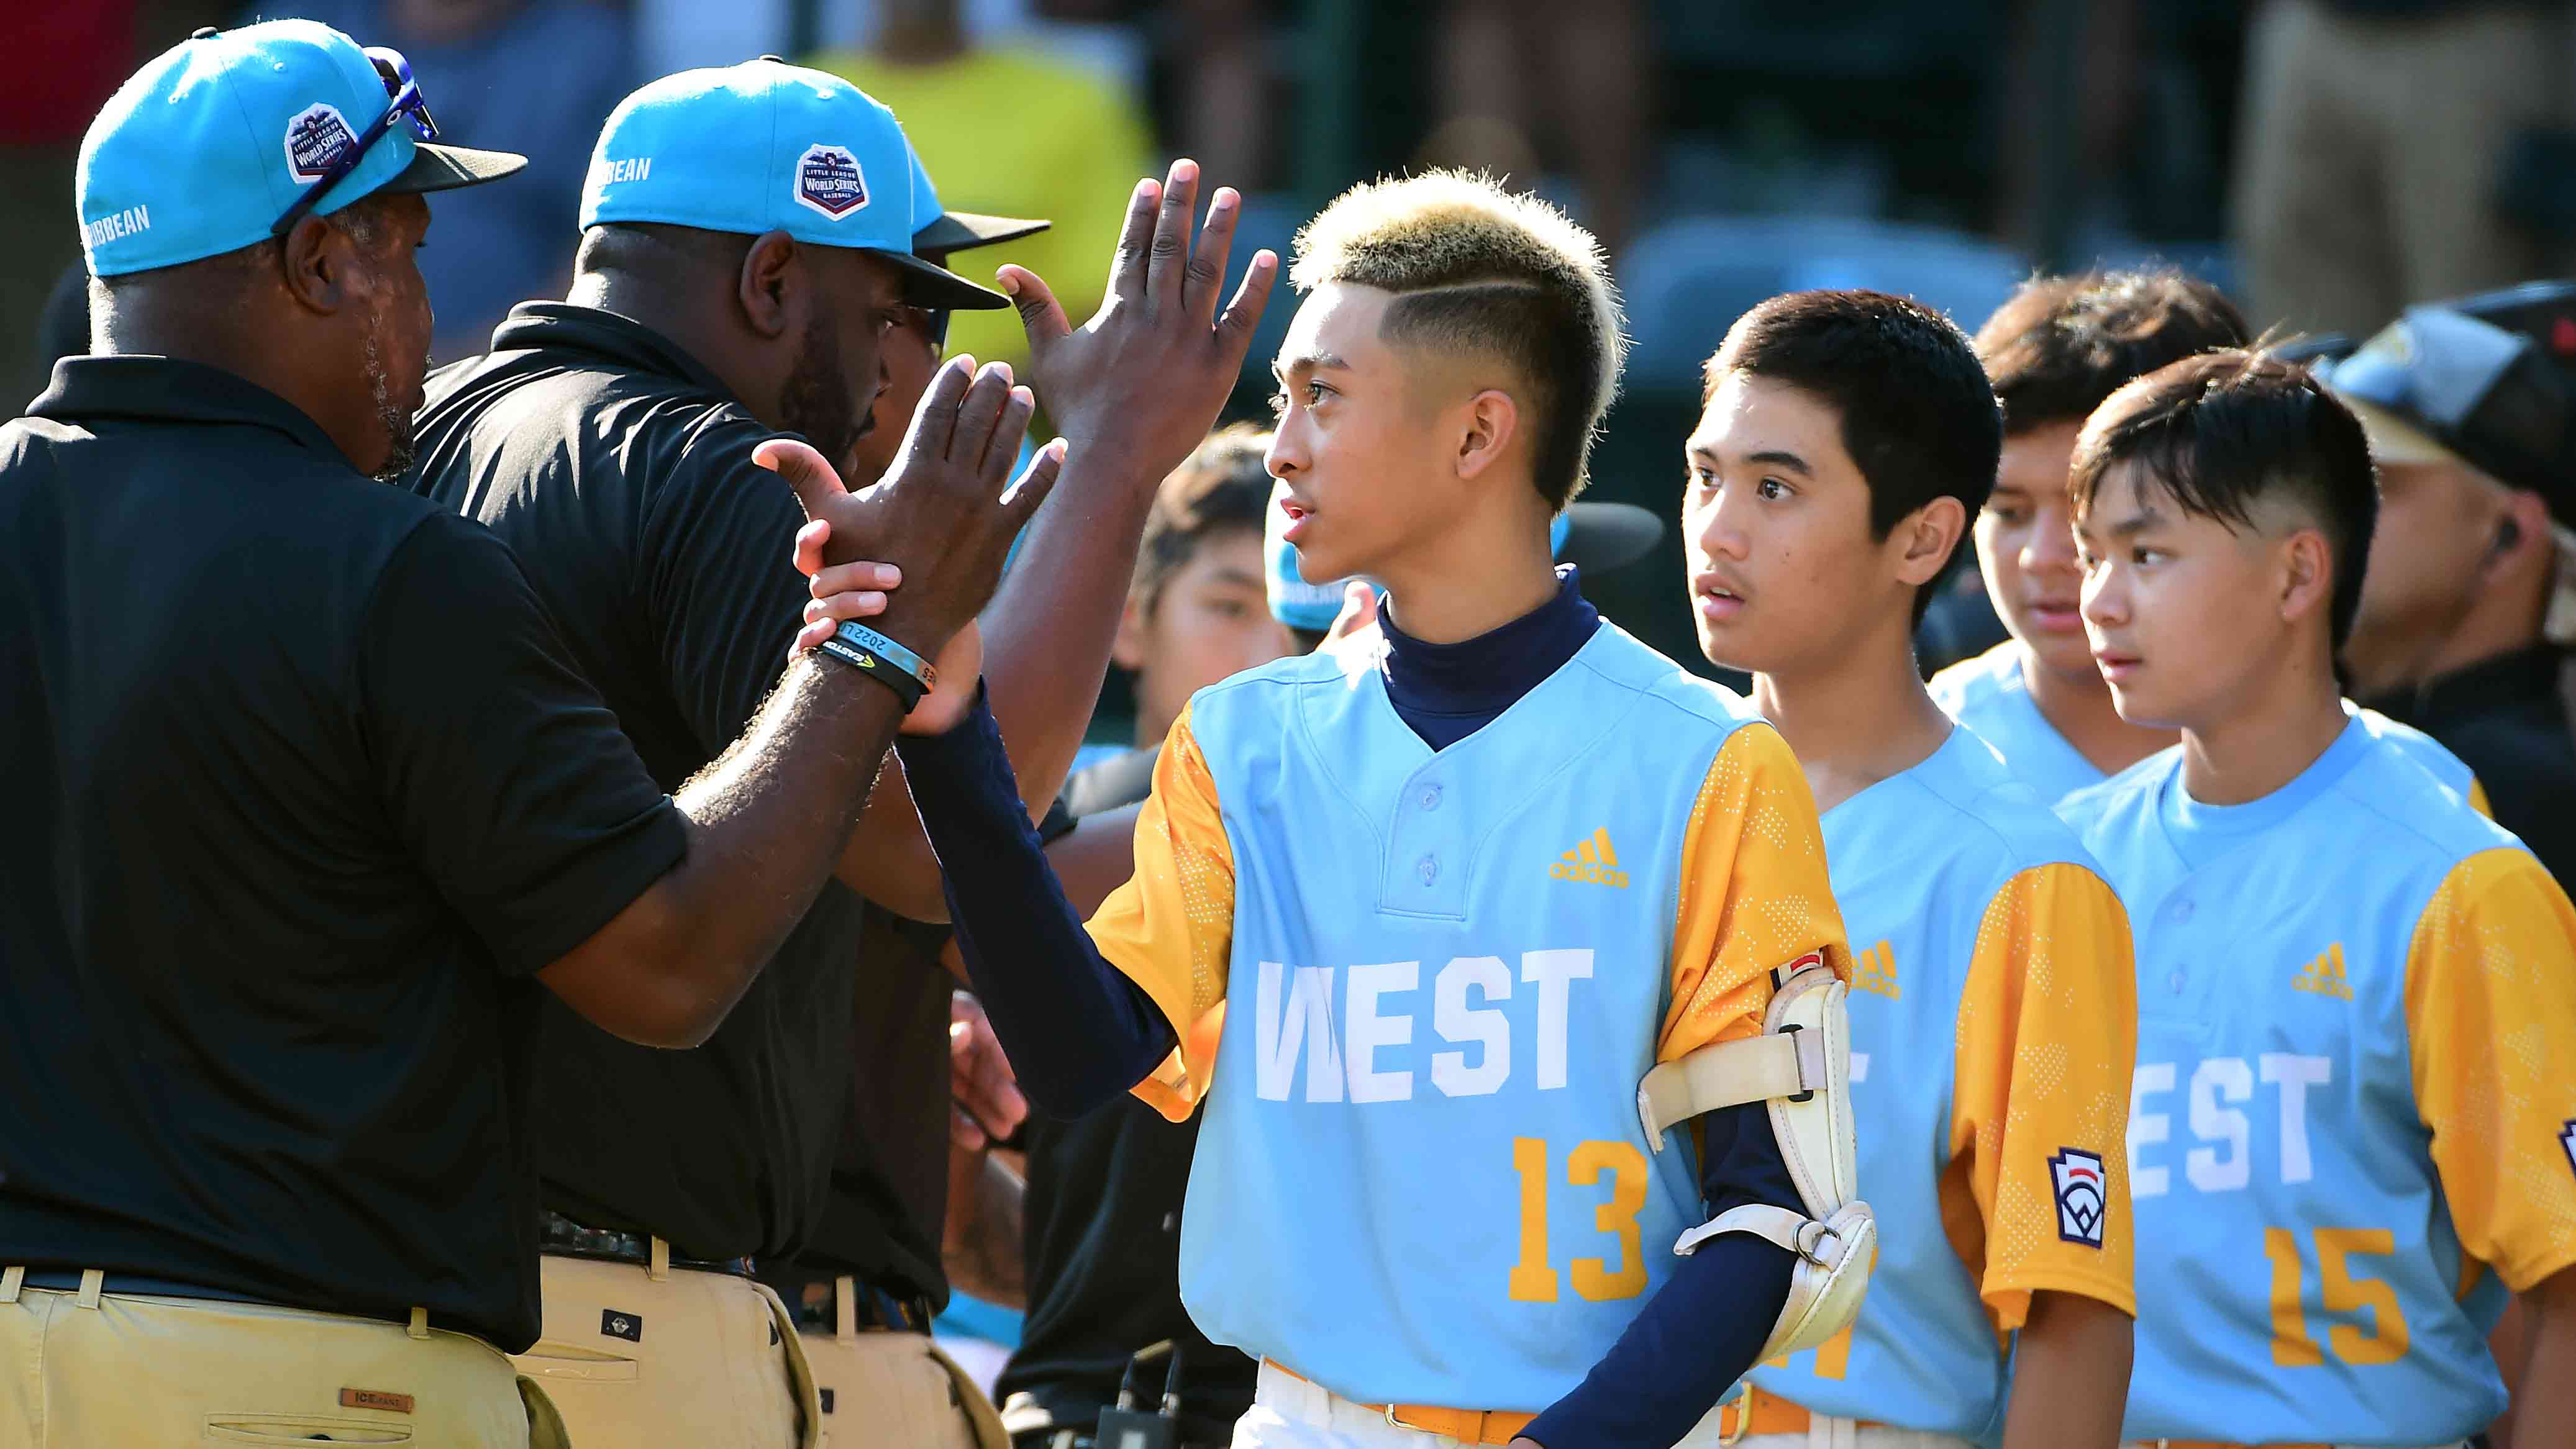 Little League World Series mercy rule and other game-play rules